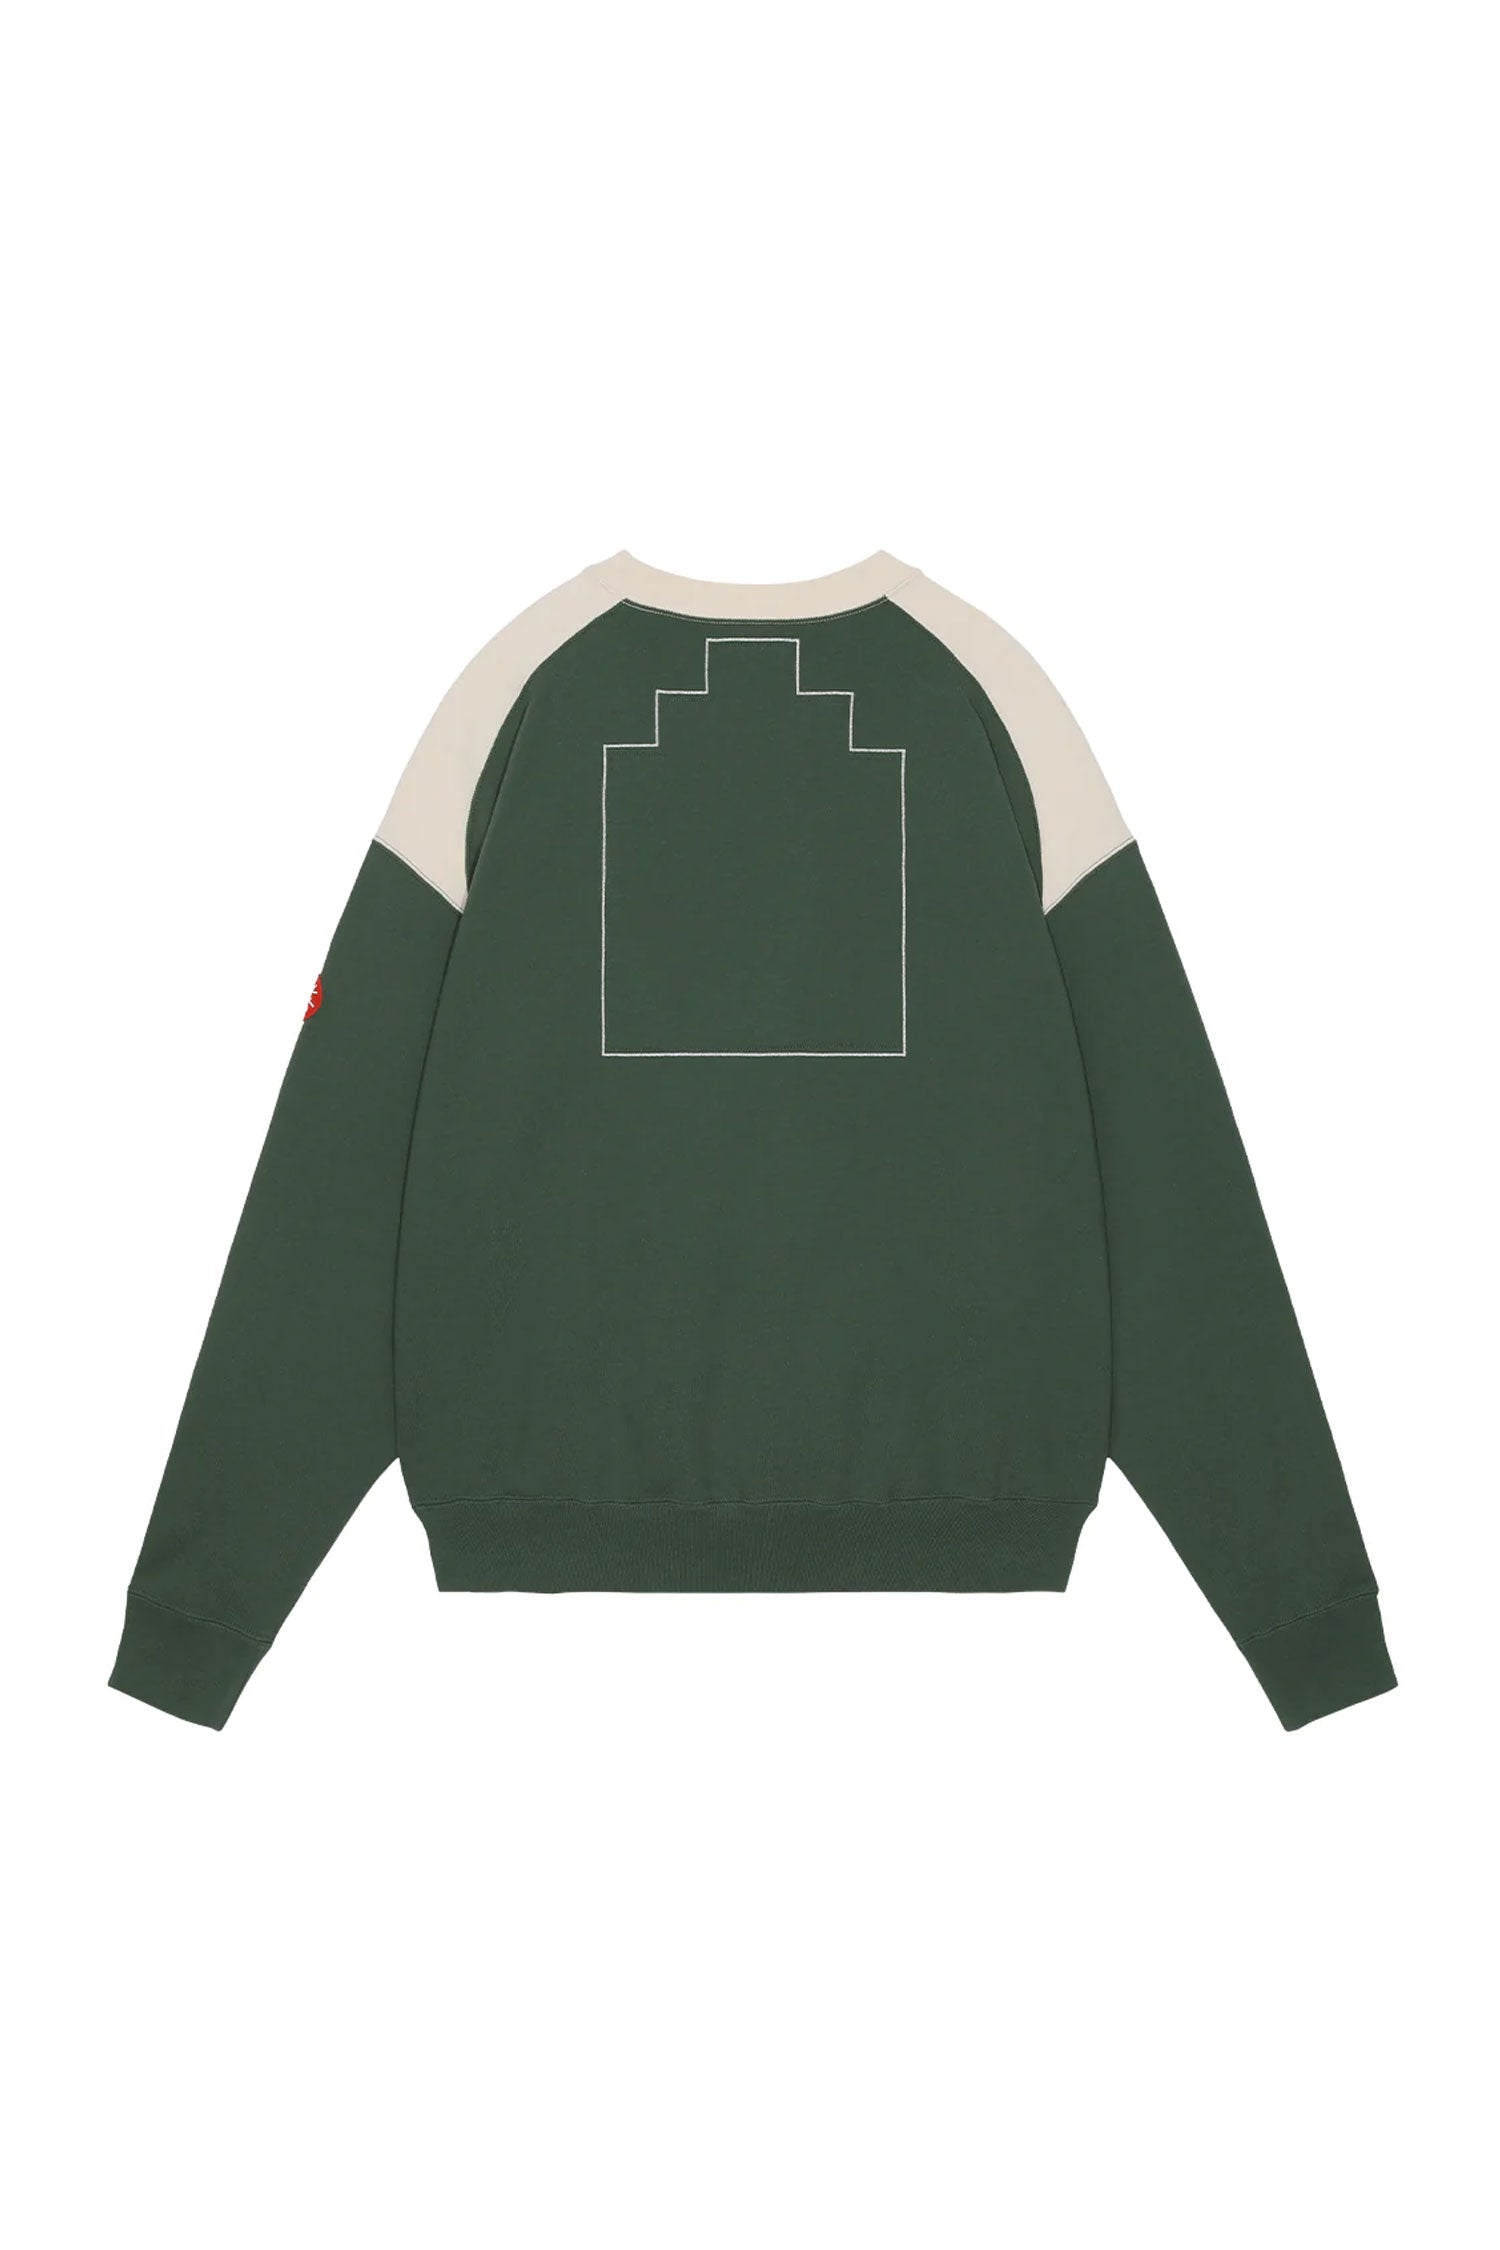 The CAV EMPT - PANEL SHOULDER CREW NECK  available online with global shipping, and in PAM Stores Melbourne and Sydney.